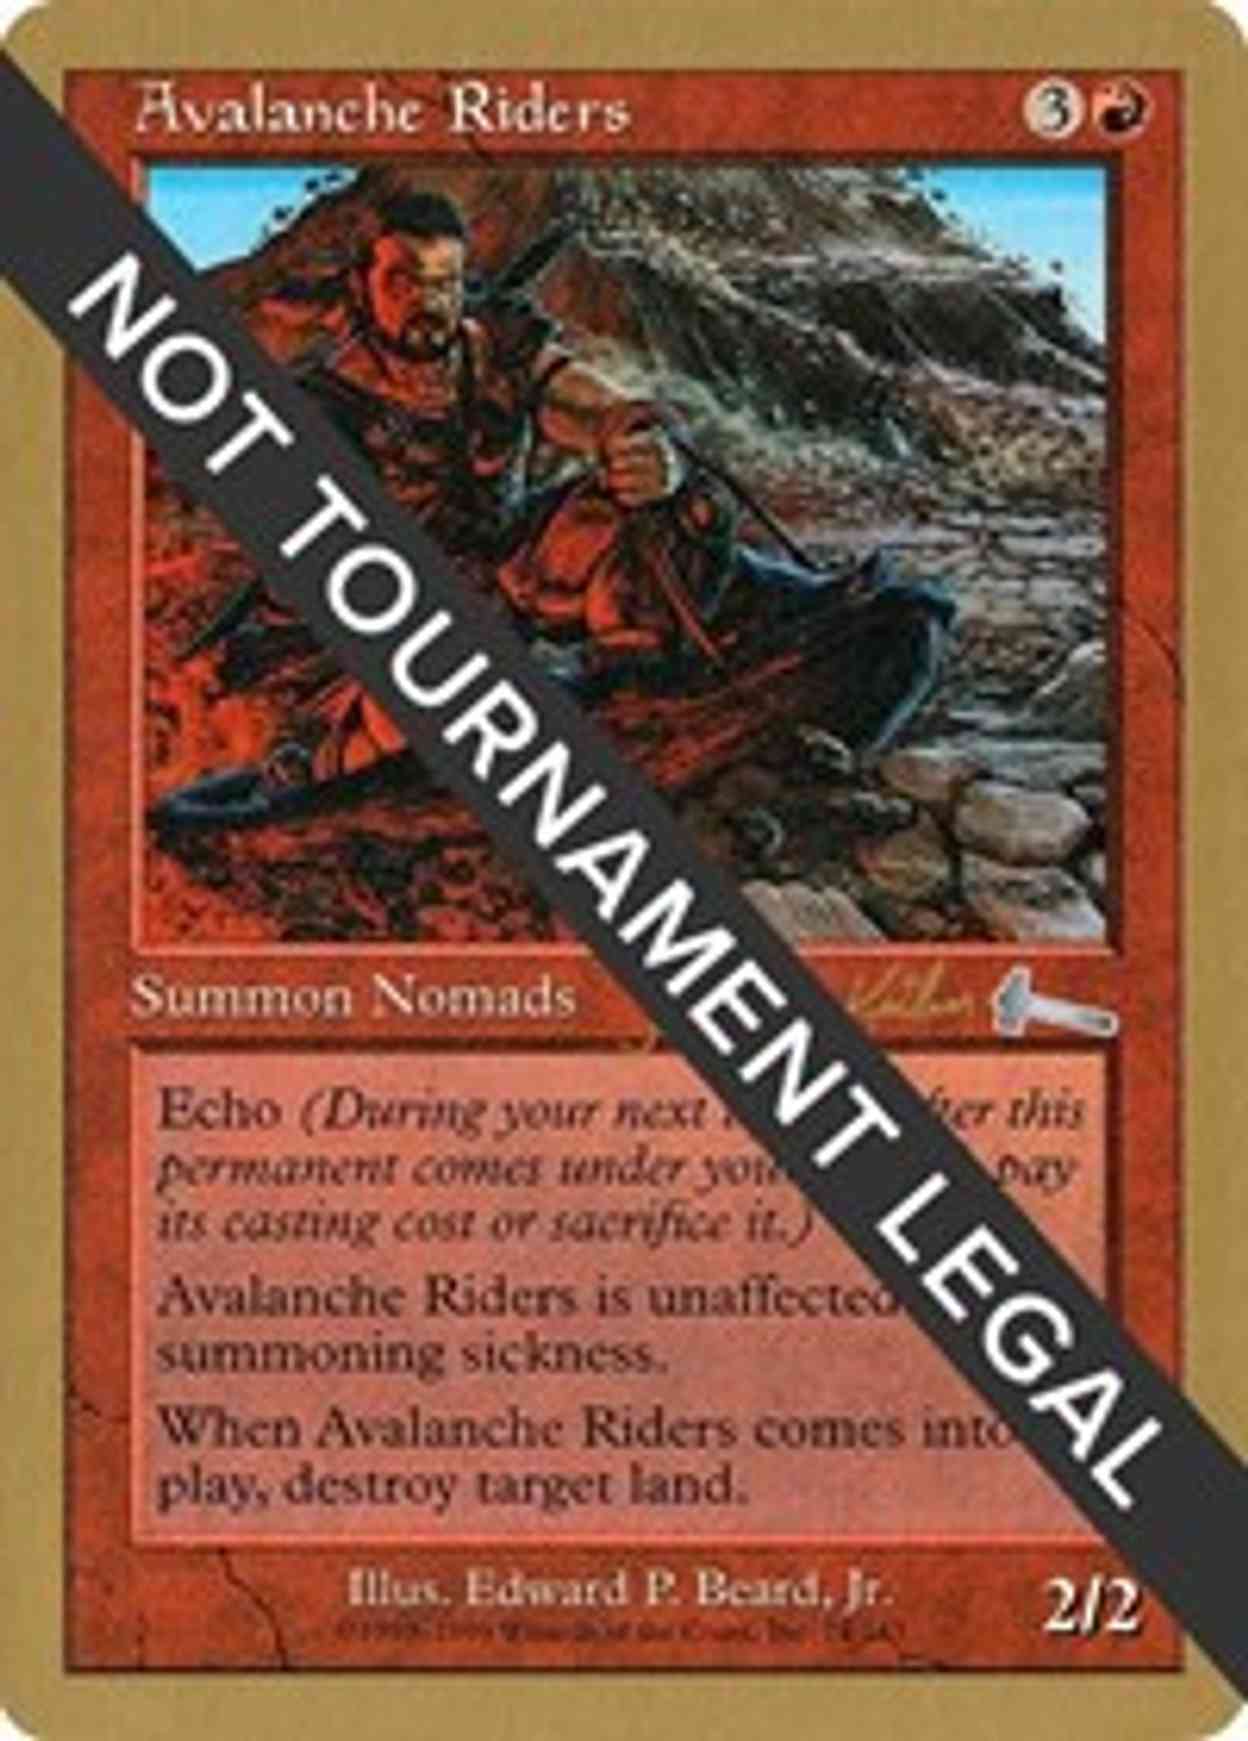 Avalanche Riders - 2000 Janosch Kuhn (ULG) magic card front